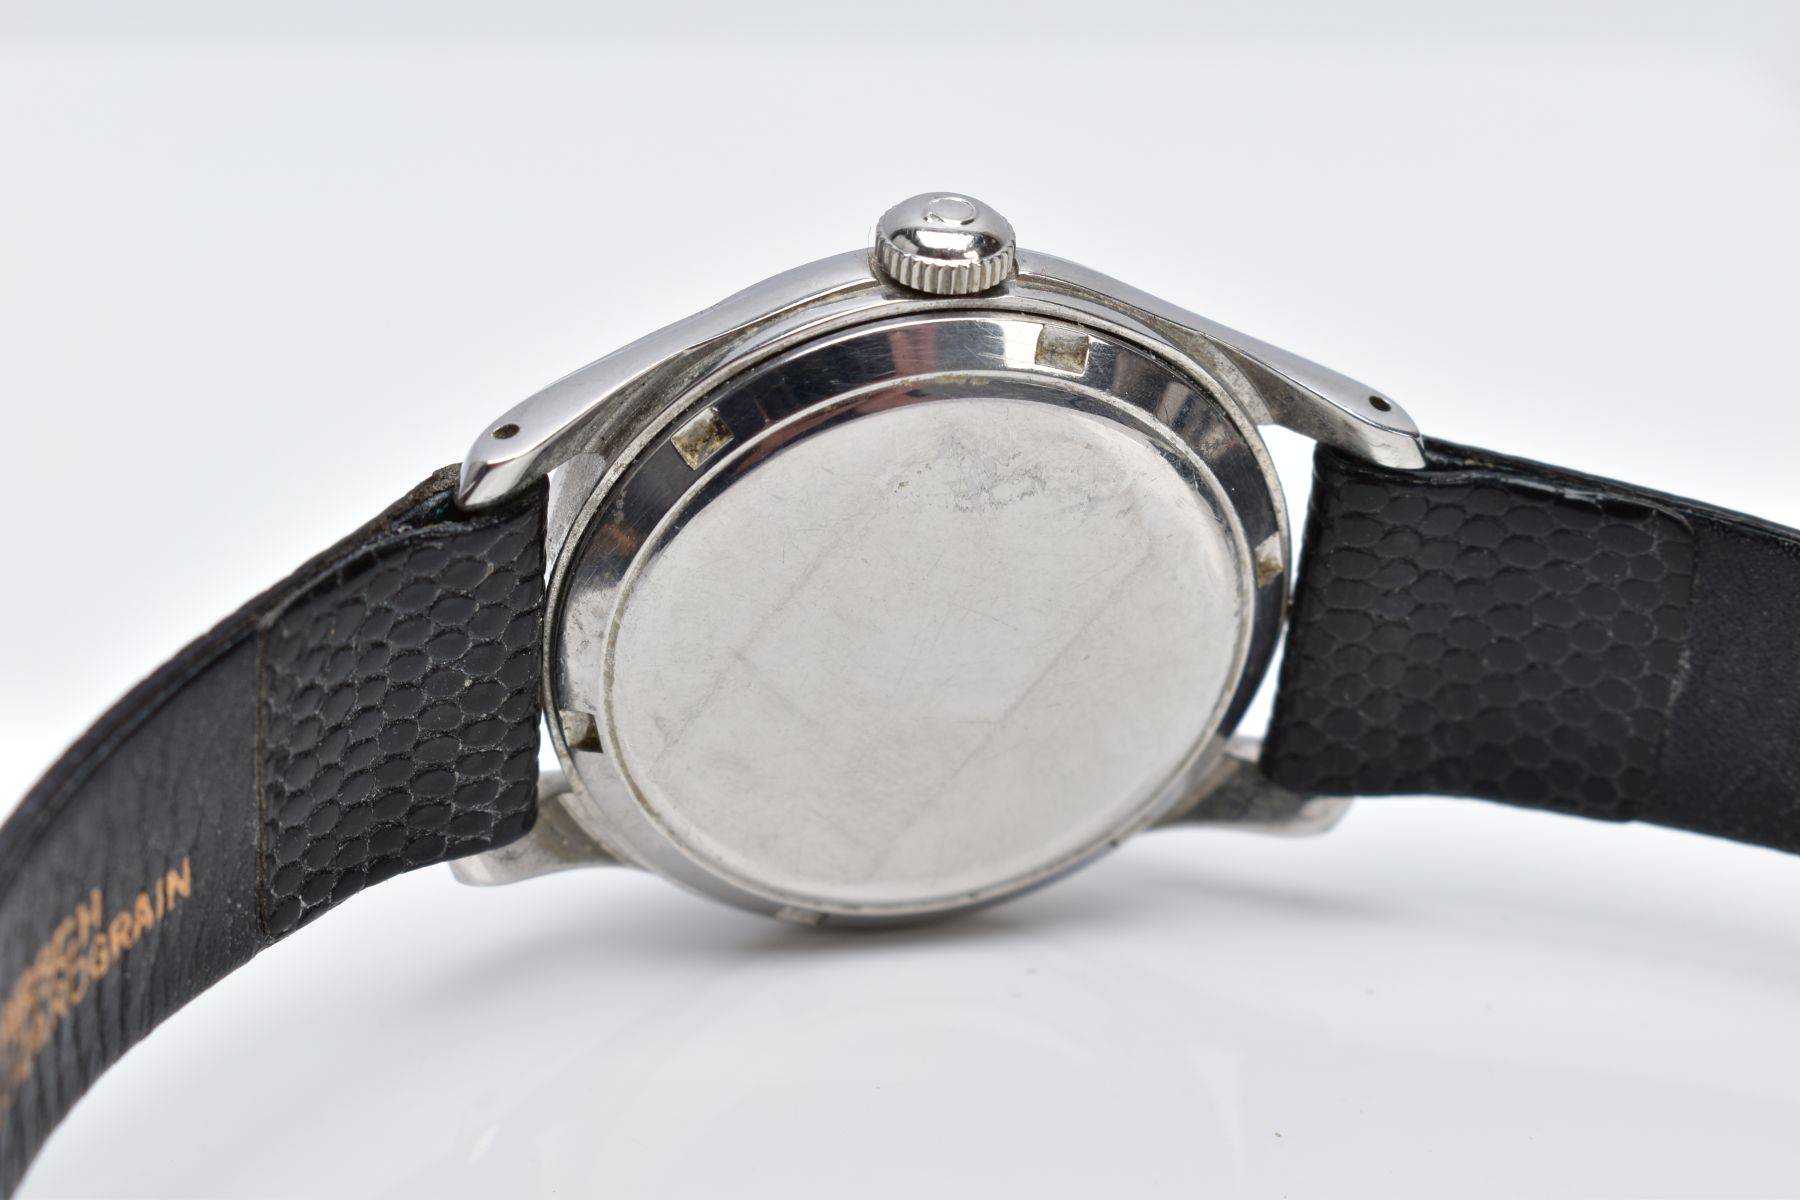 A HAND WOUND OMEGA WRISTWATCH, circa 1943, cream dial with Arabic numerals, black spade hands with a - Image 4 of 9